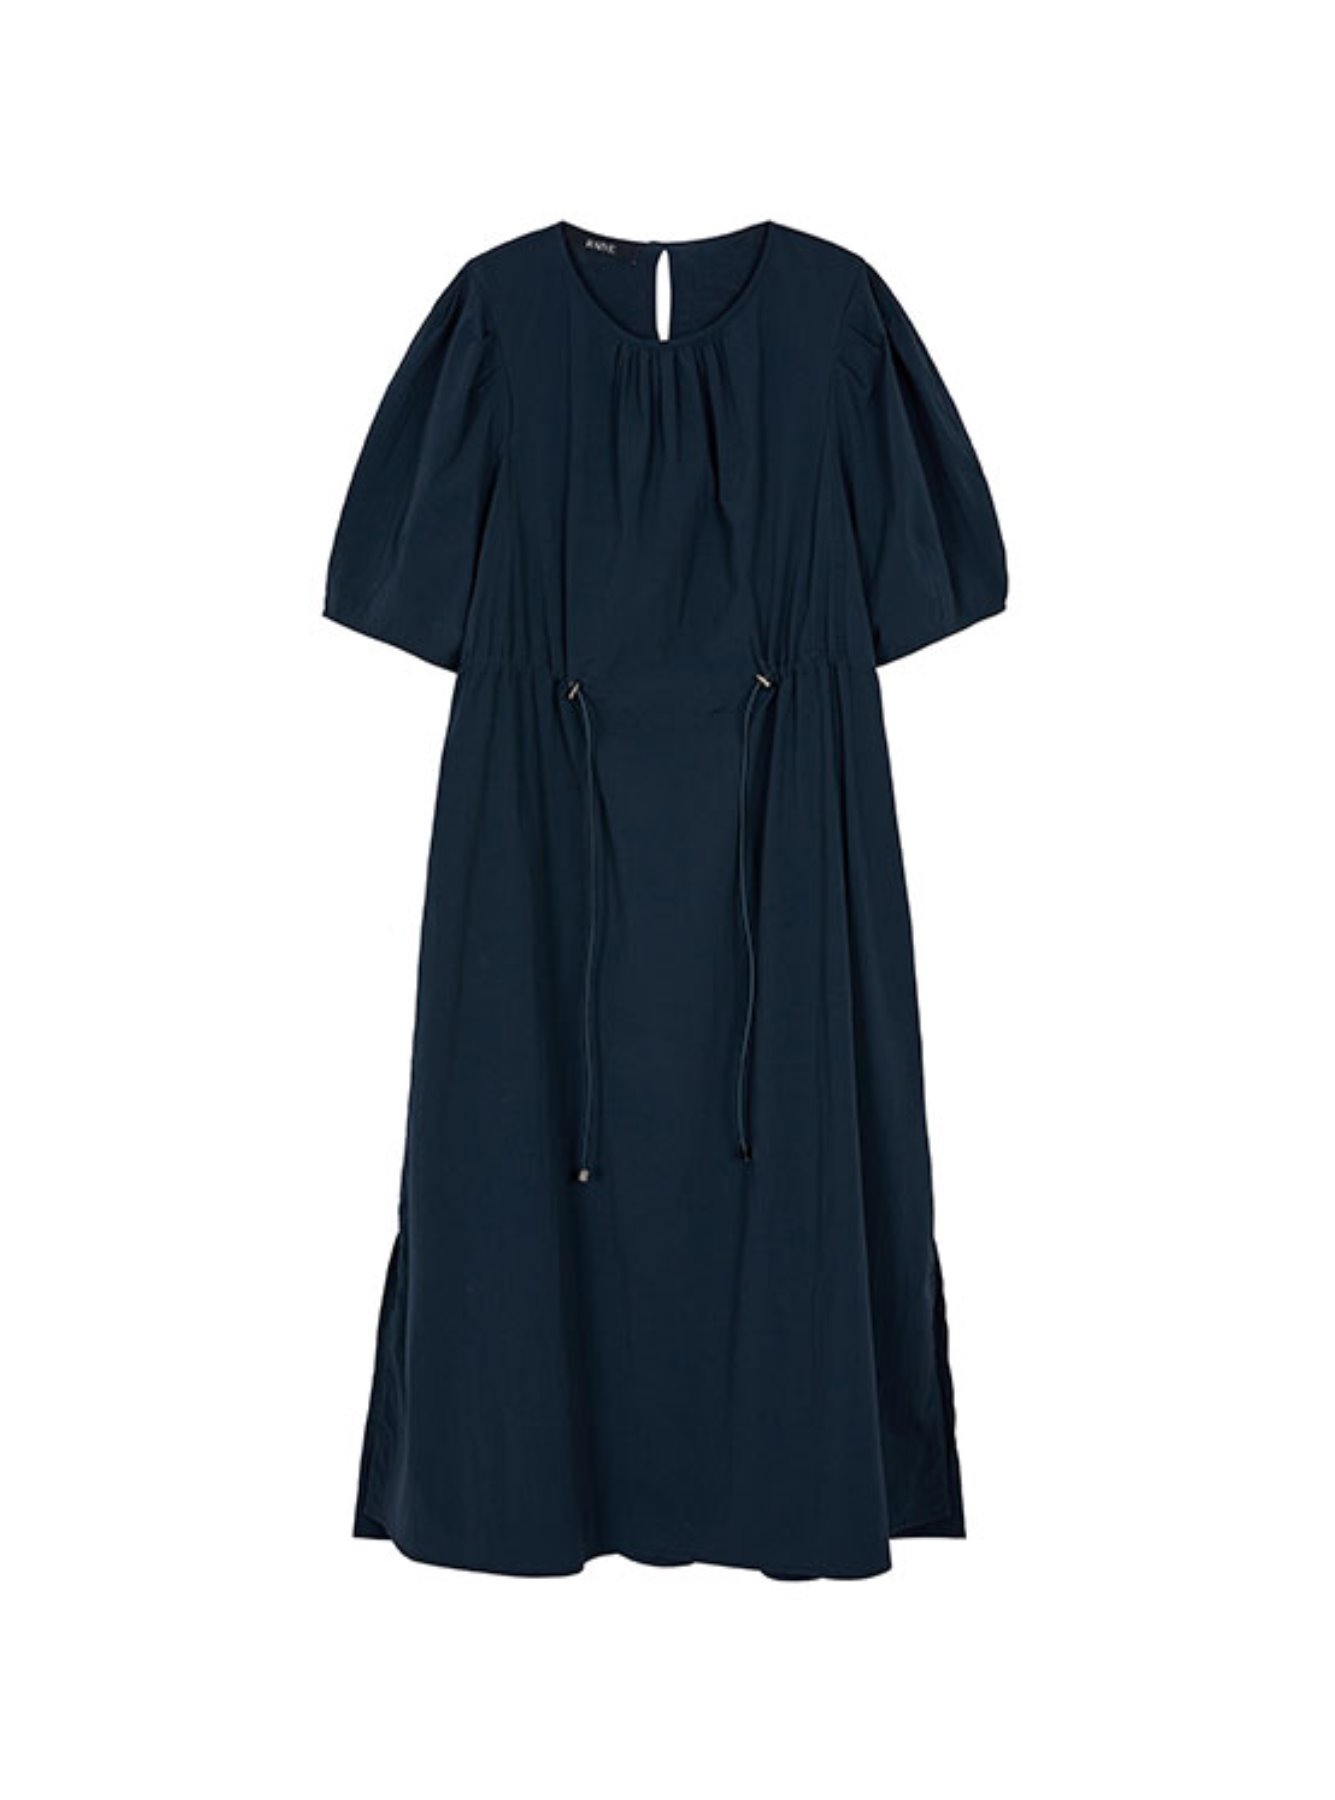 Gathered Puff-sleeved Midi Dress in Navy VW2MO214-23